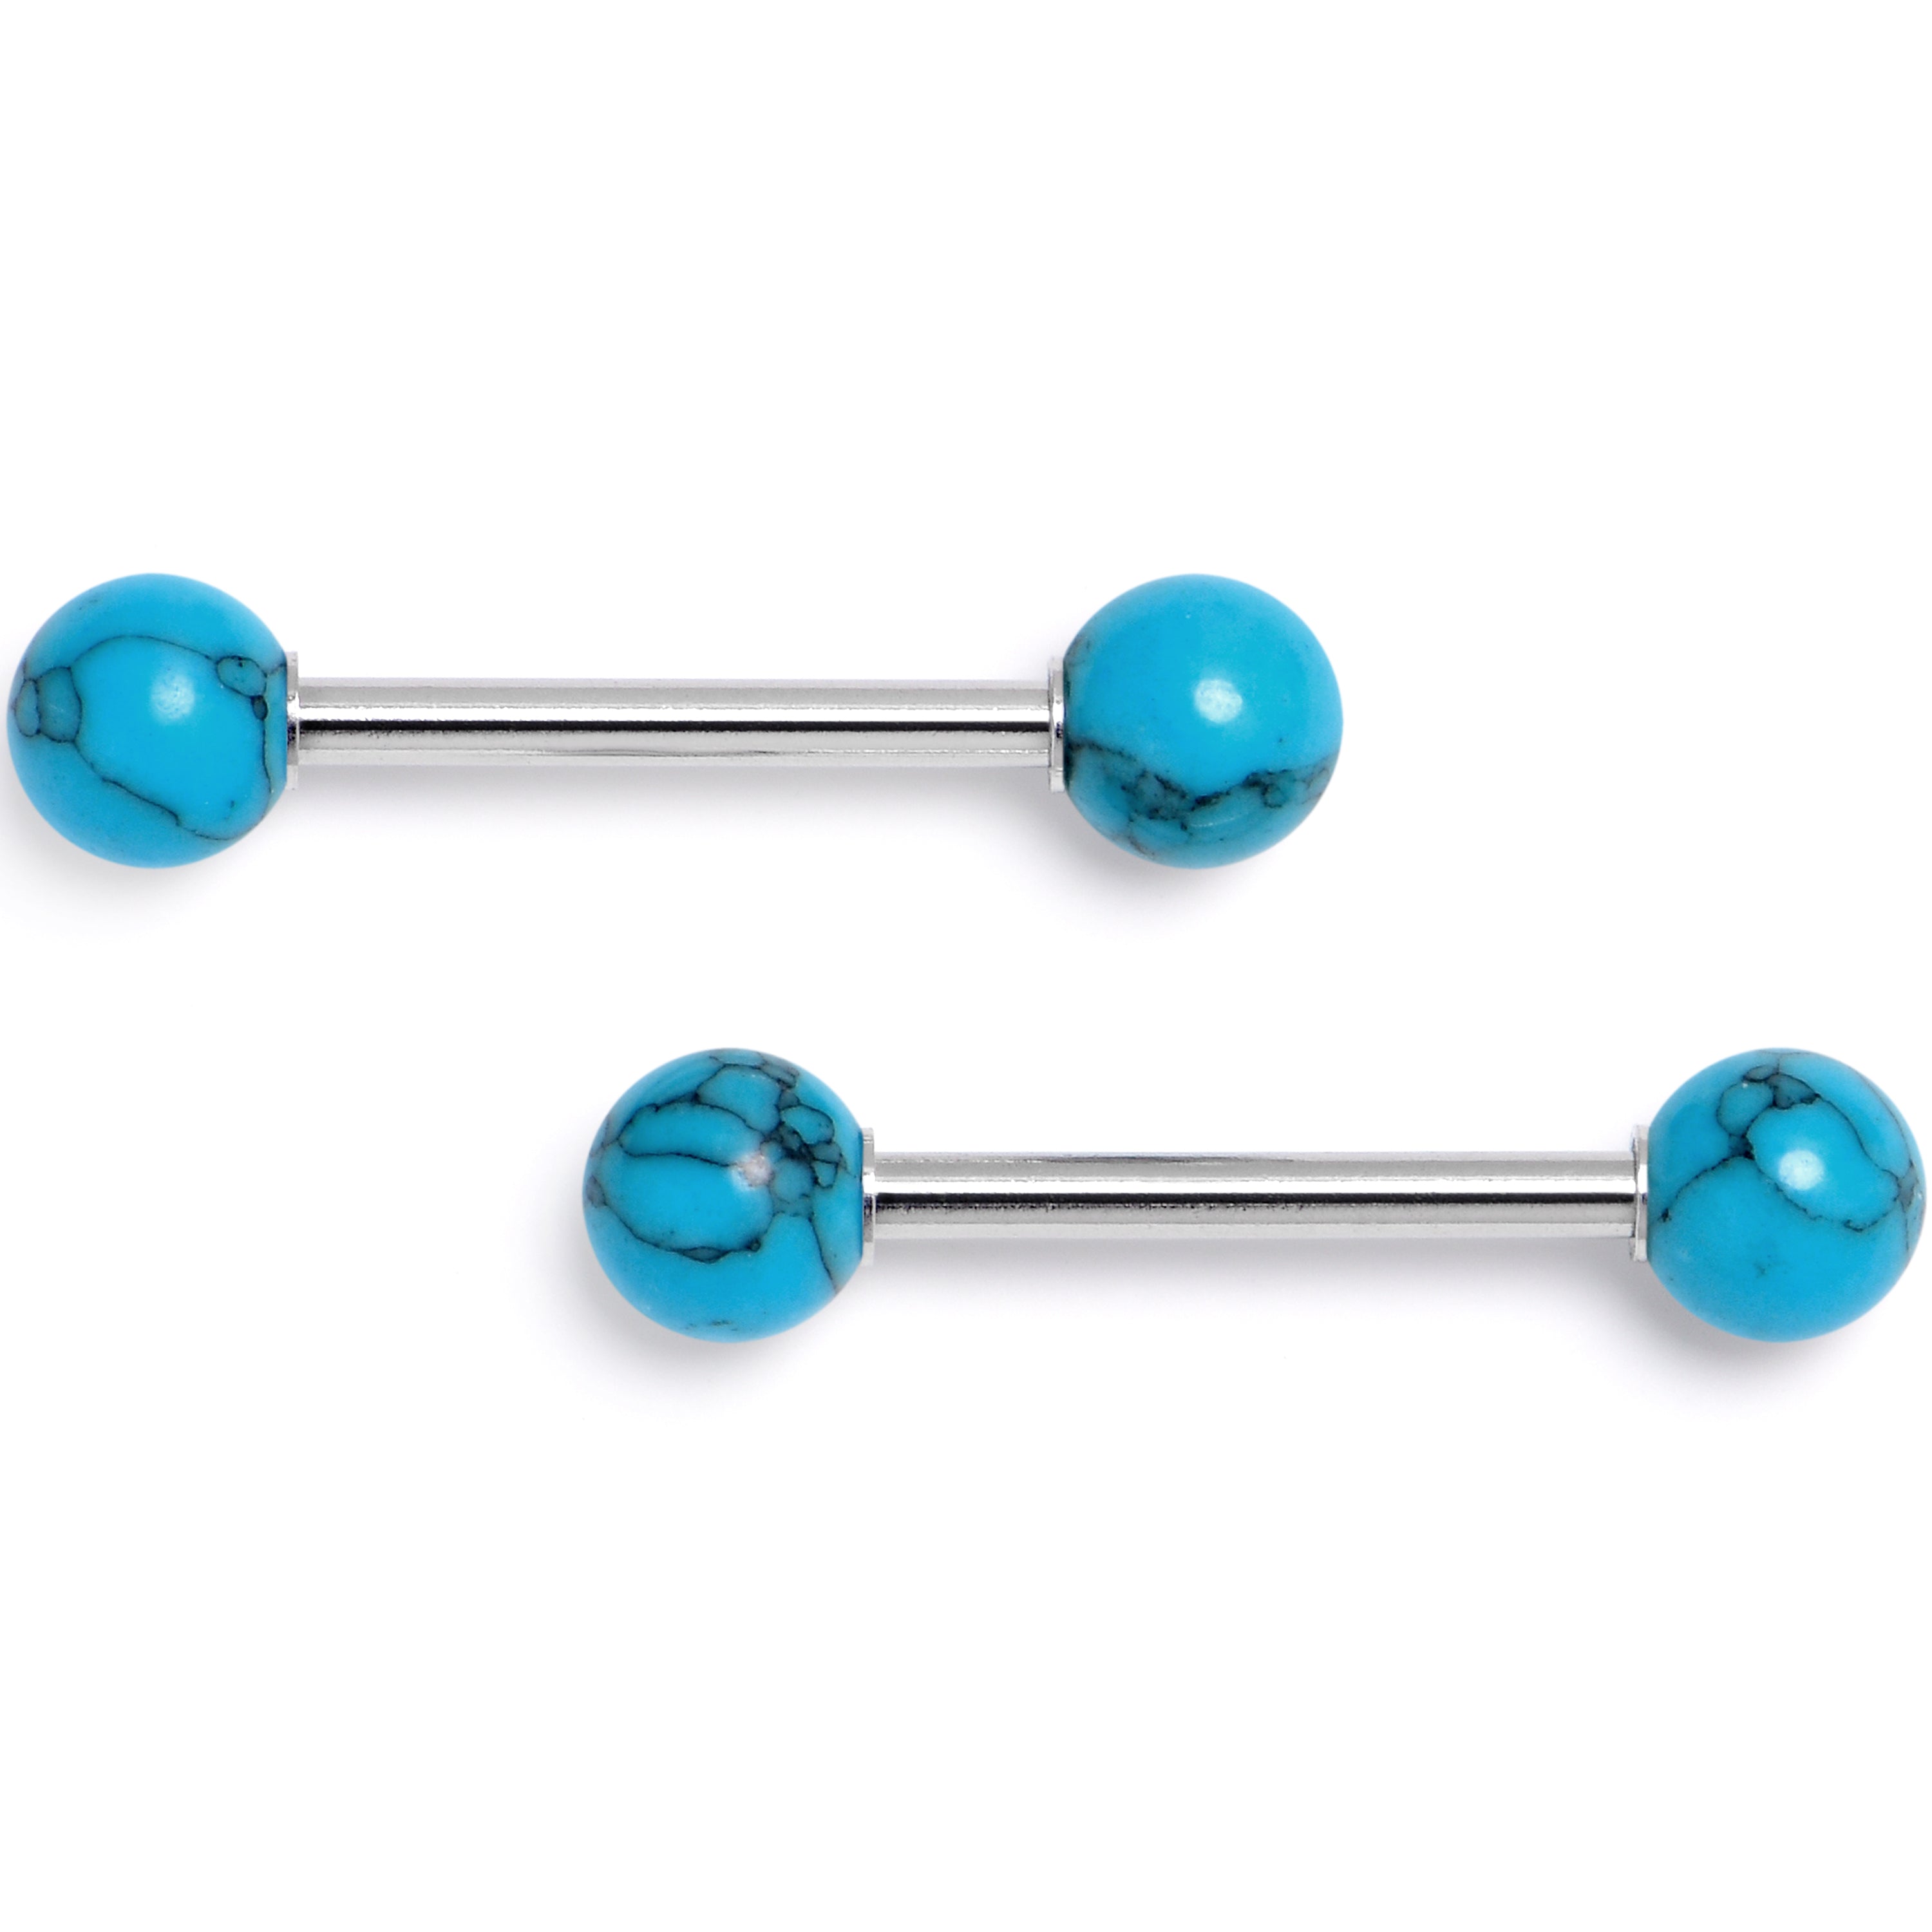 14 Gauge 5/8 Blue Turquoise Natural Stone Barbell Nipple Ring Set